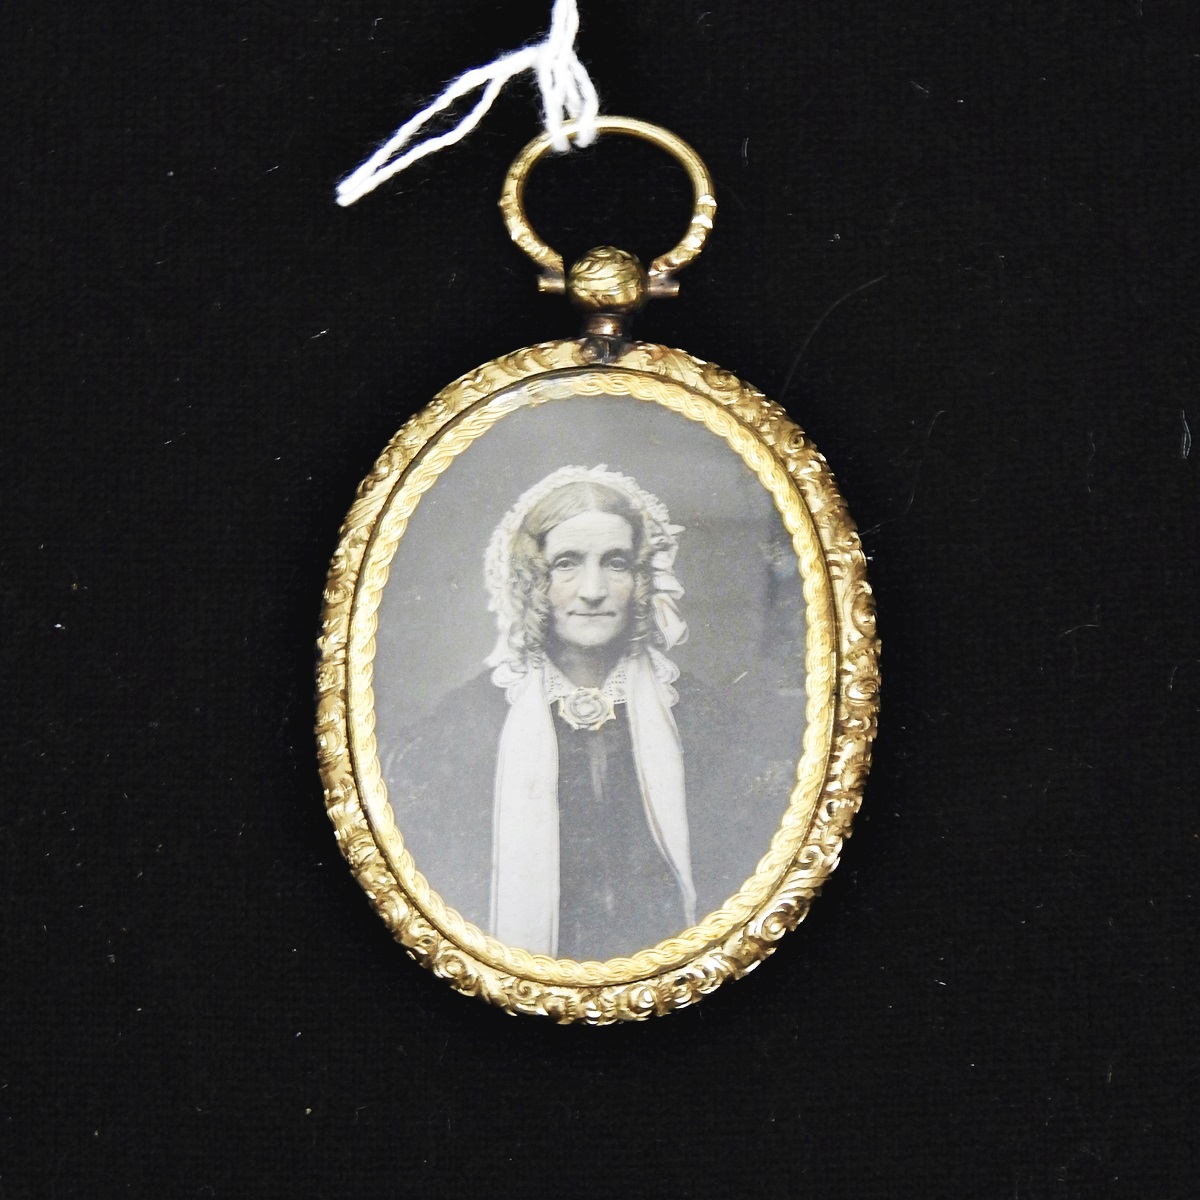 Victorian ornate pinchbeck/gold-plated glass locket with ambro-type portrait photograph